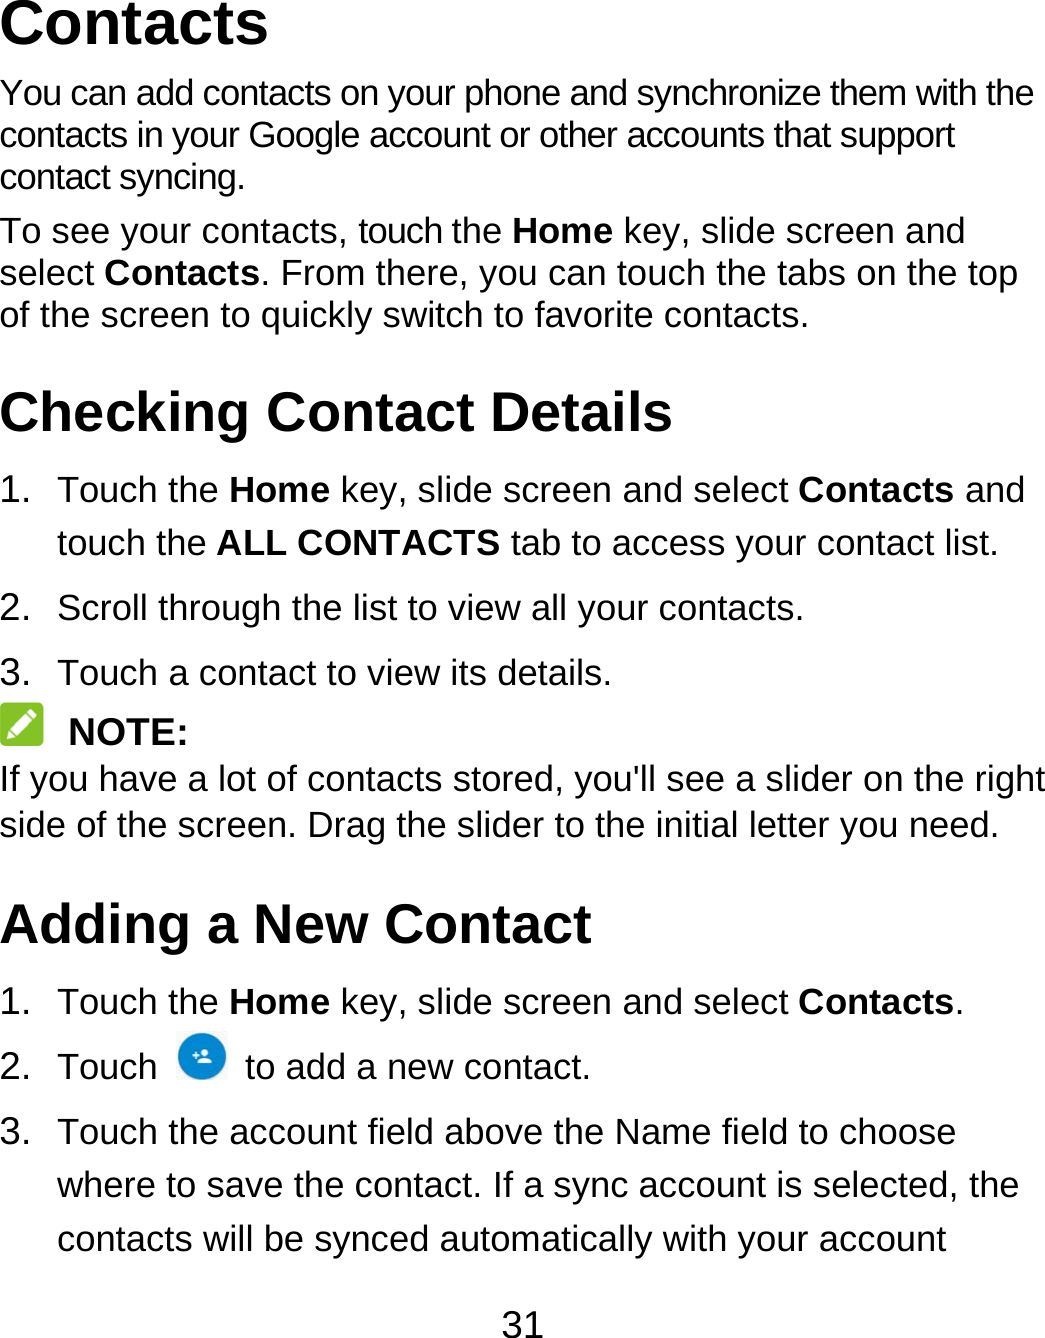 31 Contacts You can add contacts on your phone and synchronize them with the contacts in your Google account or other accounts that support contact syncing. To see your contacts, touch the Home key, slide screen and select Contacts. From there, you can touch the tabs on the top of the screen to quickly switch to favorite contacts. Checking Contact Details 1.  Touch the Home key, slide screen and select Contacts and touch the ALL CONTACTS tab to access your contact list. 2.  Scroll through the list to view all your contacts. 3.  Touch a contact to view its details.  NOTE: If you have a lot of contacts stored, you&apos;ll see a slider on the right side of the screen. Drag the slider to the initial letter you need. Adding a New Contact 1.  Touch the Home key, slide screen and select Contacts. 2.  Touch    to add a new contact. 3.  Touch the account field above the Name field to choose where to save the contact. If a sync account is selected, the contacts will be synced automatically with your account 